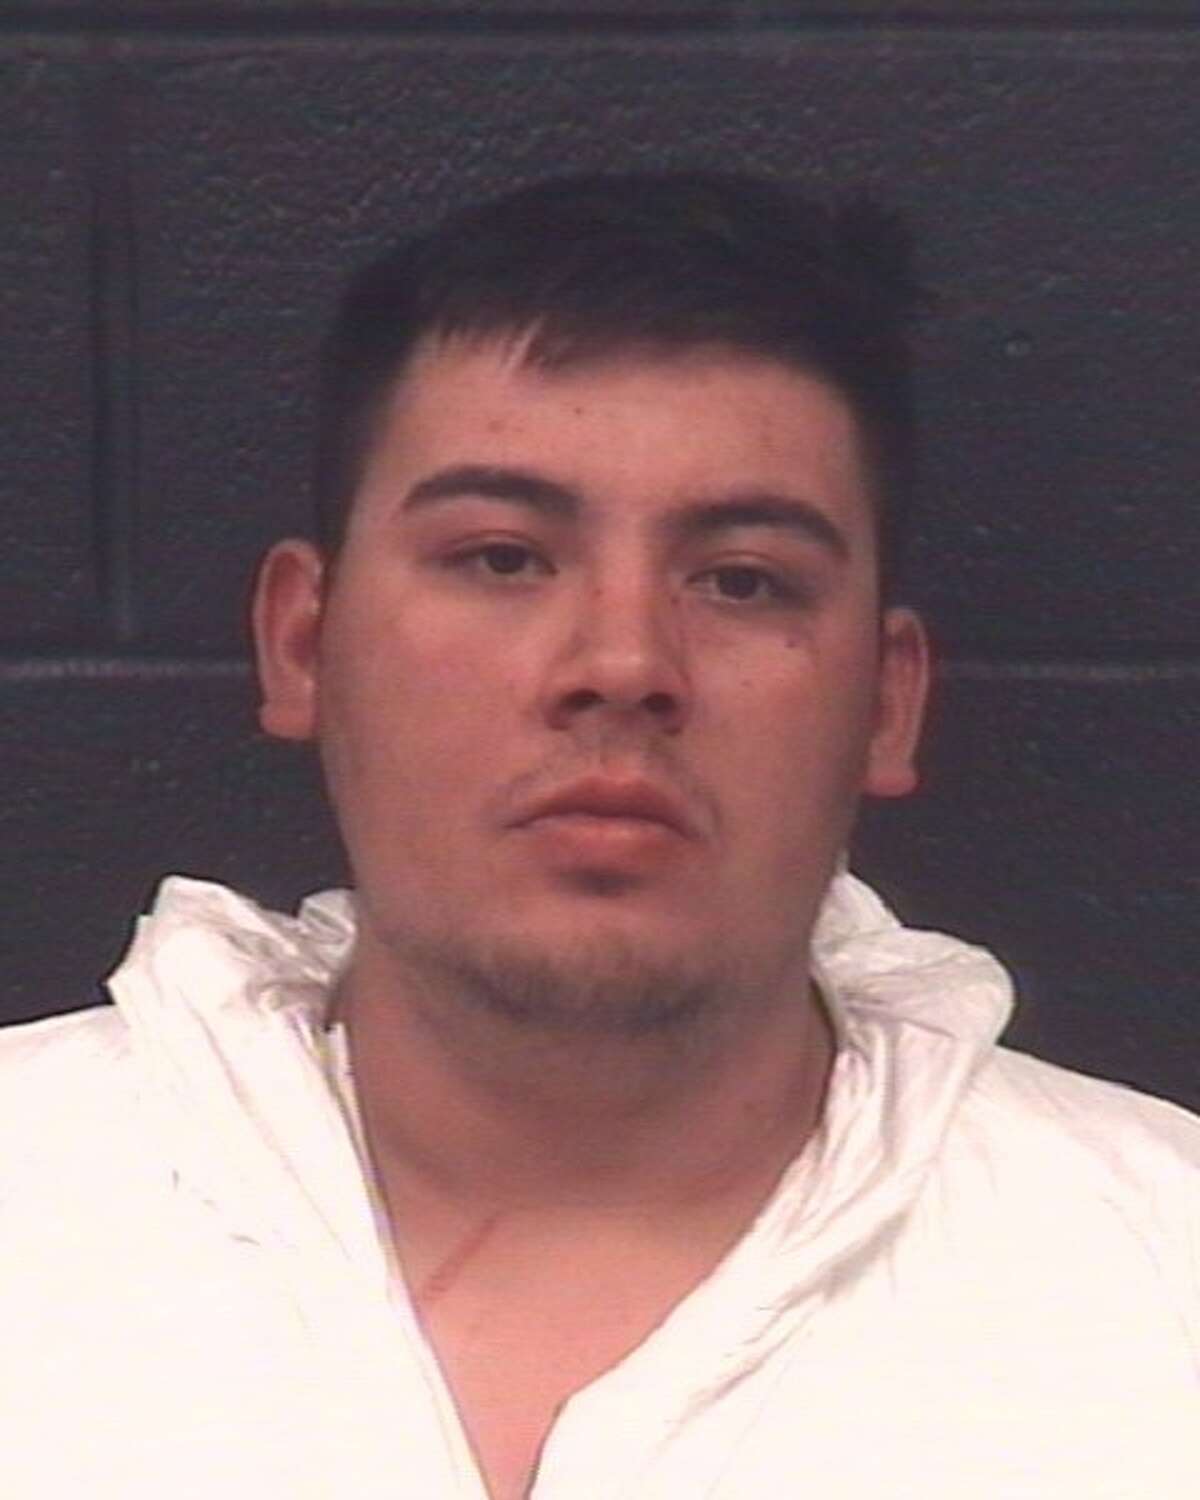 Cesar Rene Terrazas, 22, was arrested and charged with two counts of attempted capital murder, three counts of aggravated assault of a date, family, household member with a deadly weapon, and one count of burglary of habitation with intent to commit other felony.